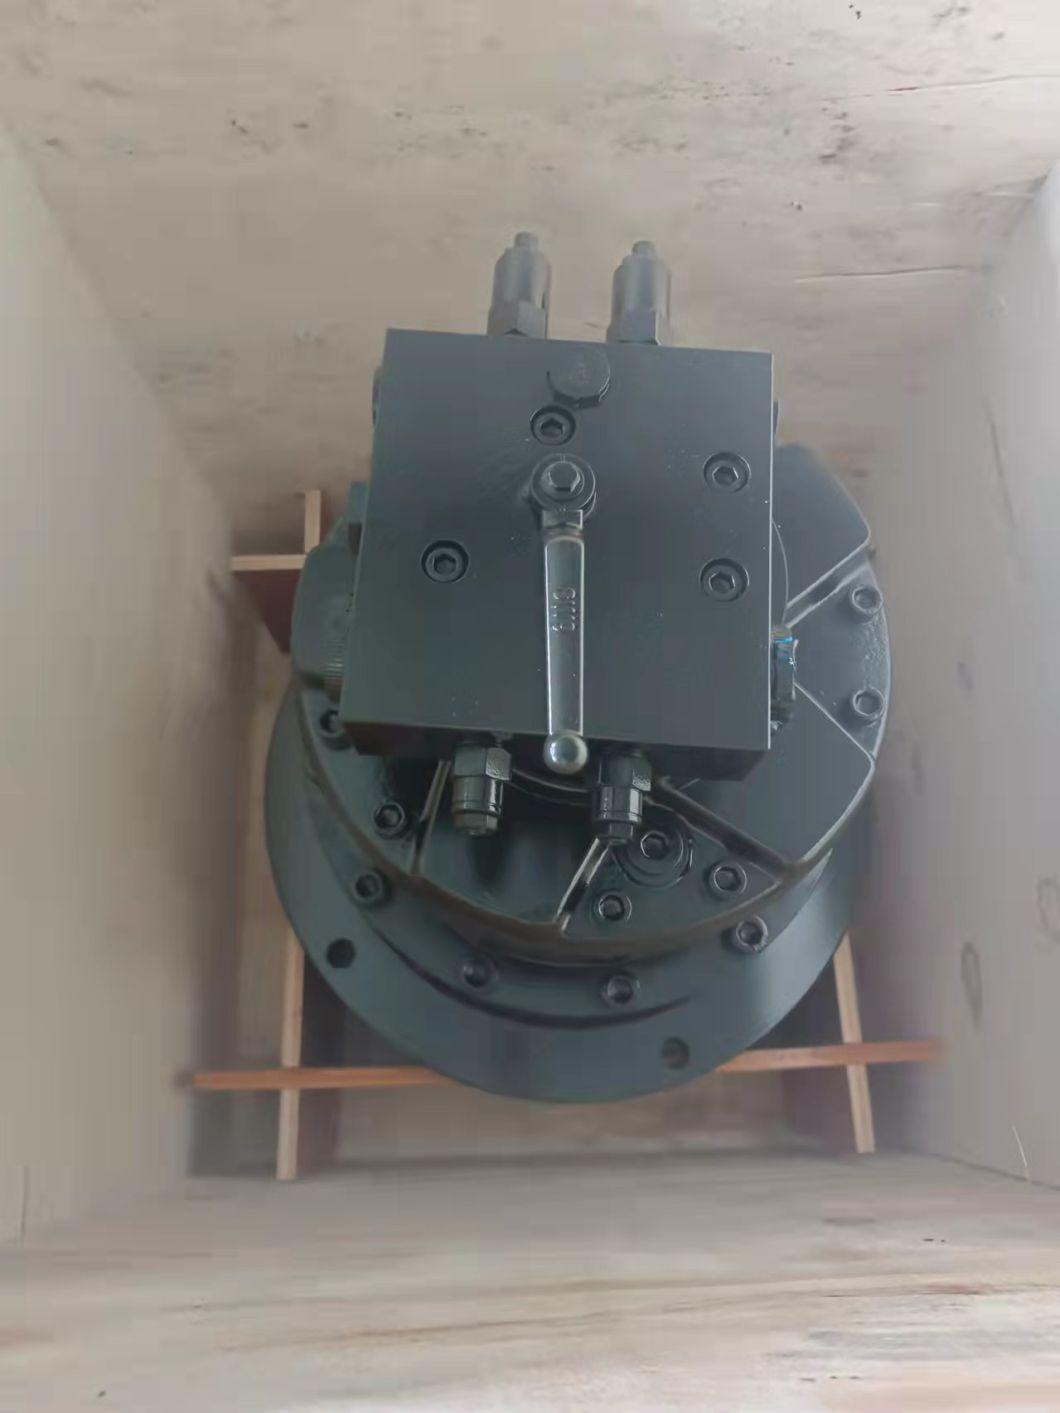 Replace Italy Sai GM2-2700 Radial Piston Rpm Inner Five Star Hydraulic Motor with Hydraulic Valve and Gear Reducer for Ship Door, Drilling Rig Use.